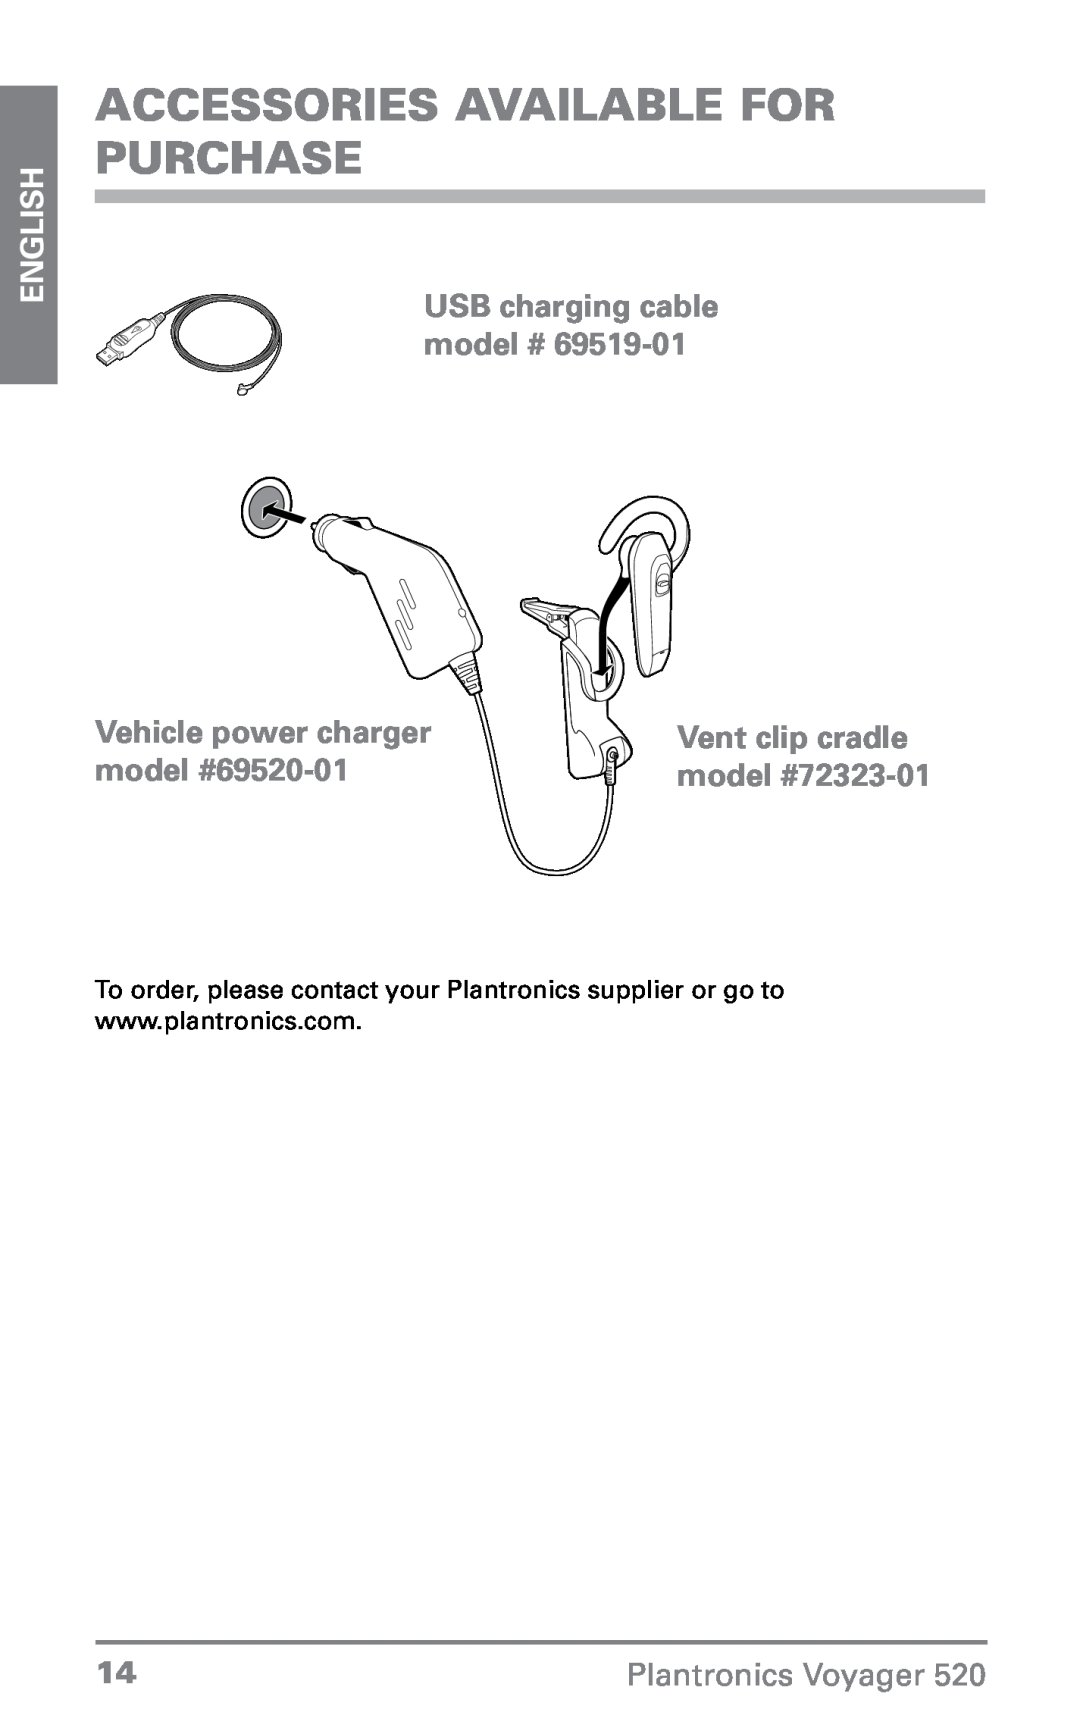 Plantronics manual Accessories Available for purchase, USB charging cable model #, Vehicle power charger model #69520-01 